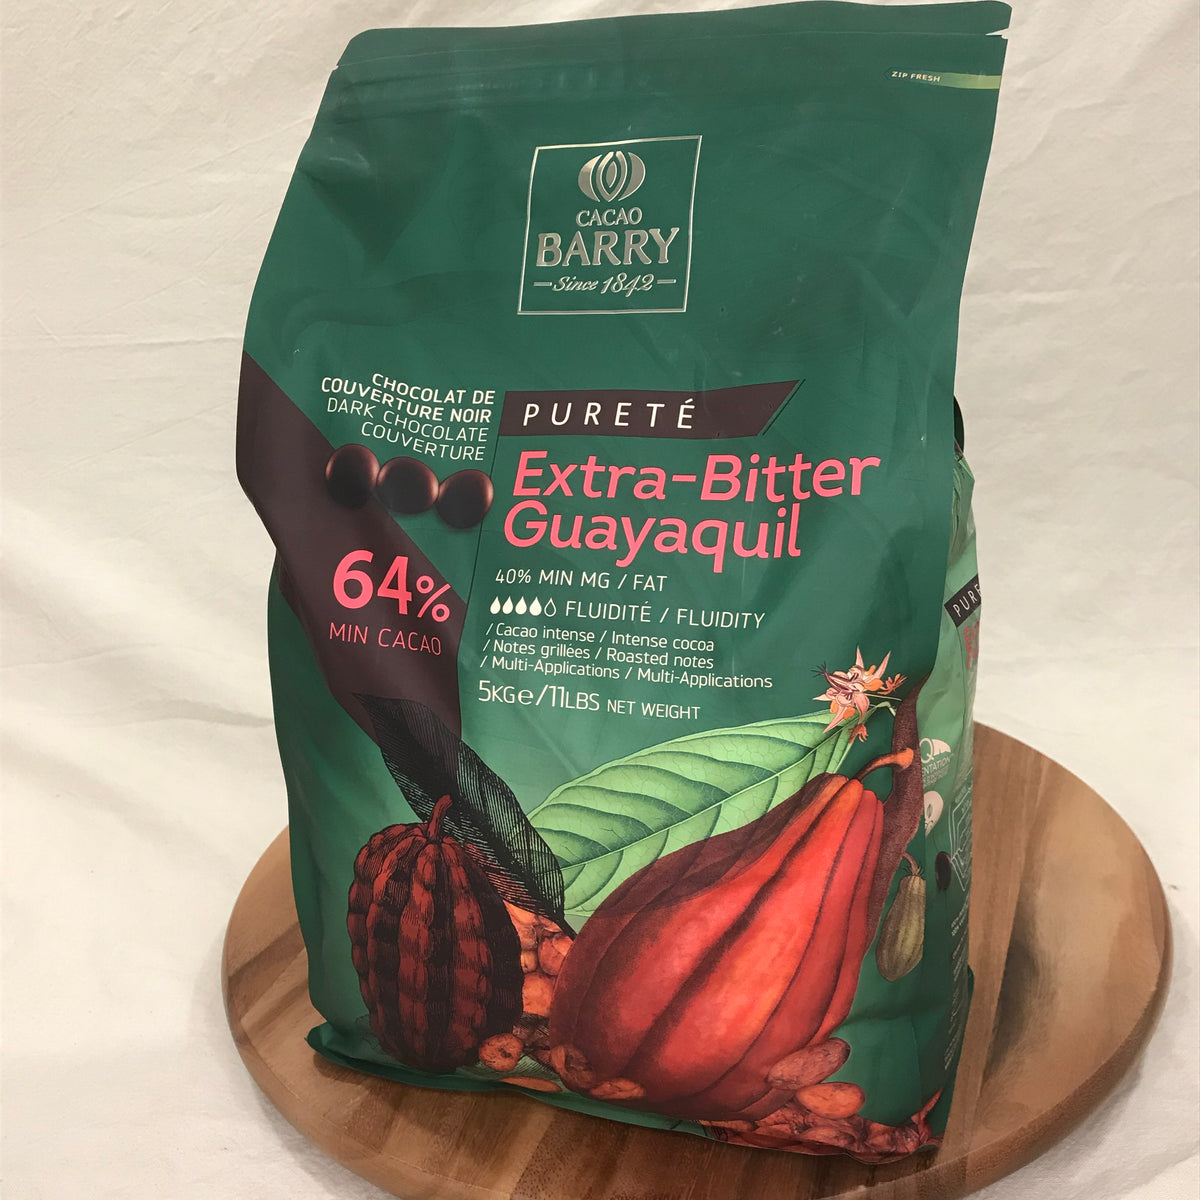 Cacao Barry Extra-Bitter Guayaquil 64% Dark Chocolate Couverture